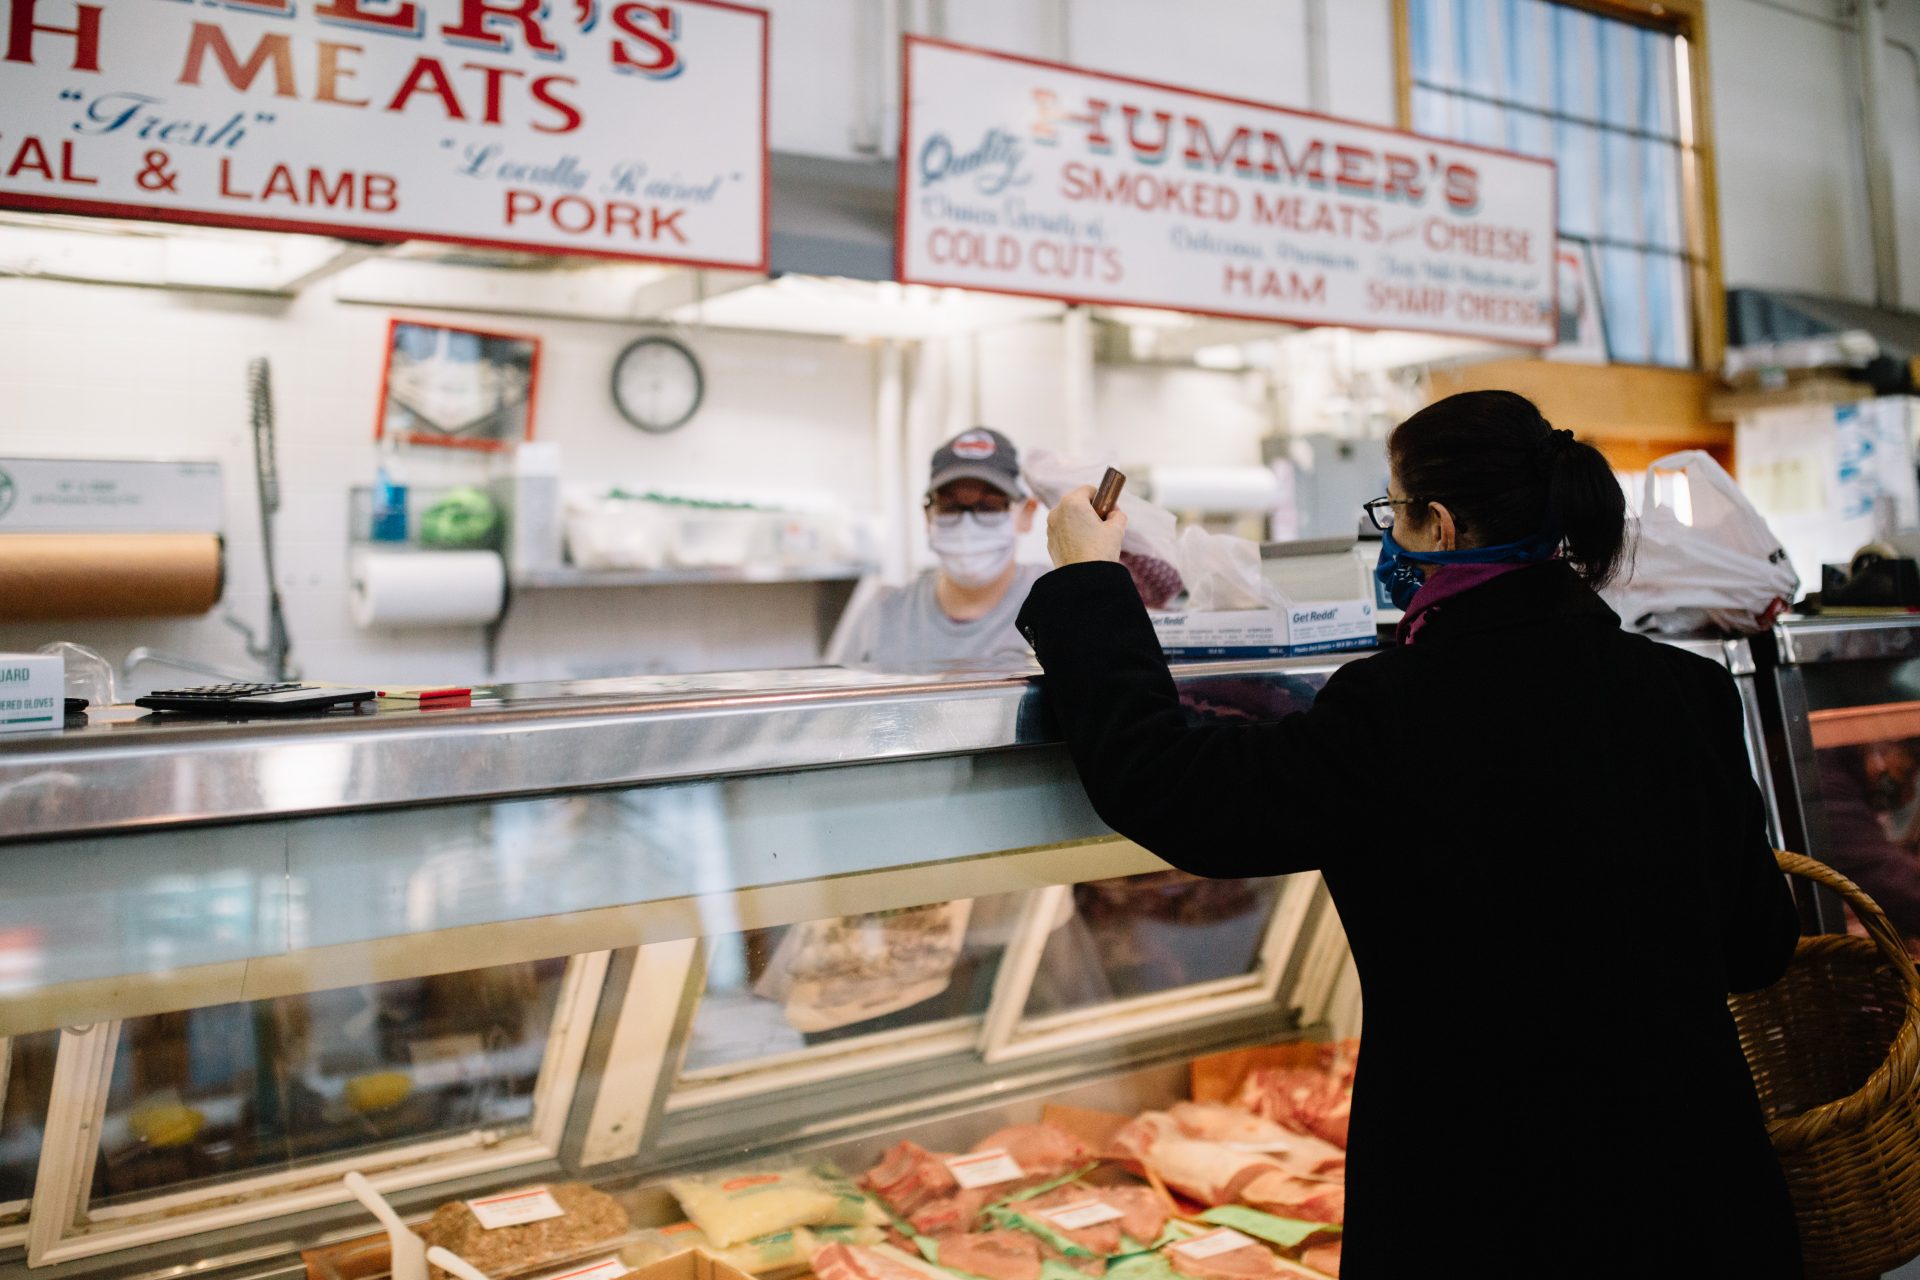 A woman purchases meat at Broad Street Market in Harrisburg on April 10, 2020. The market is much quieter since the coronavirus pandemic effectively shut down the region.